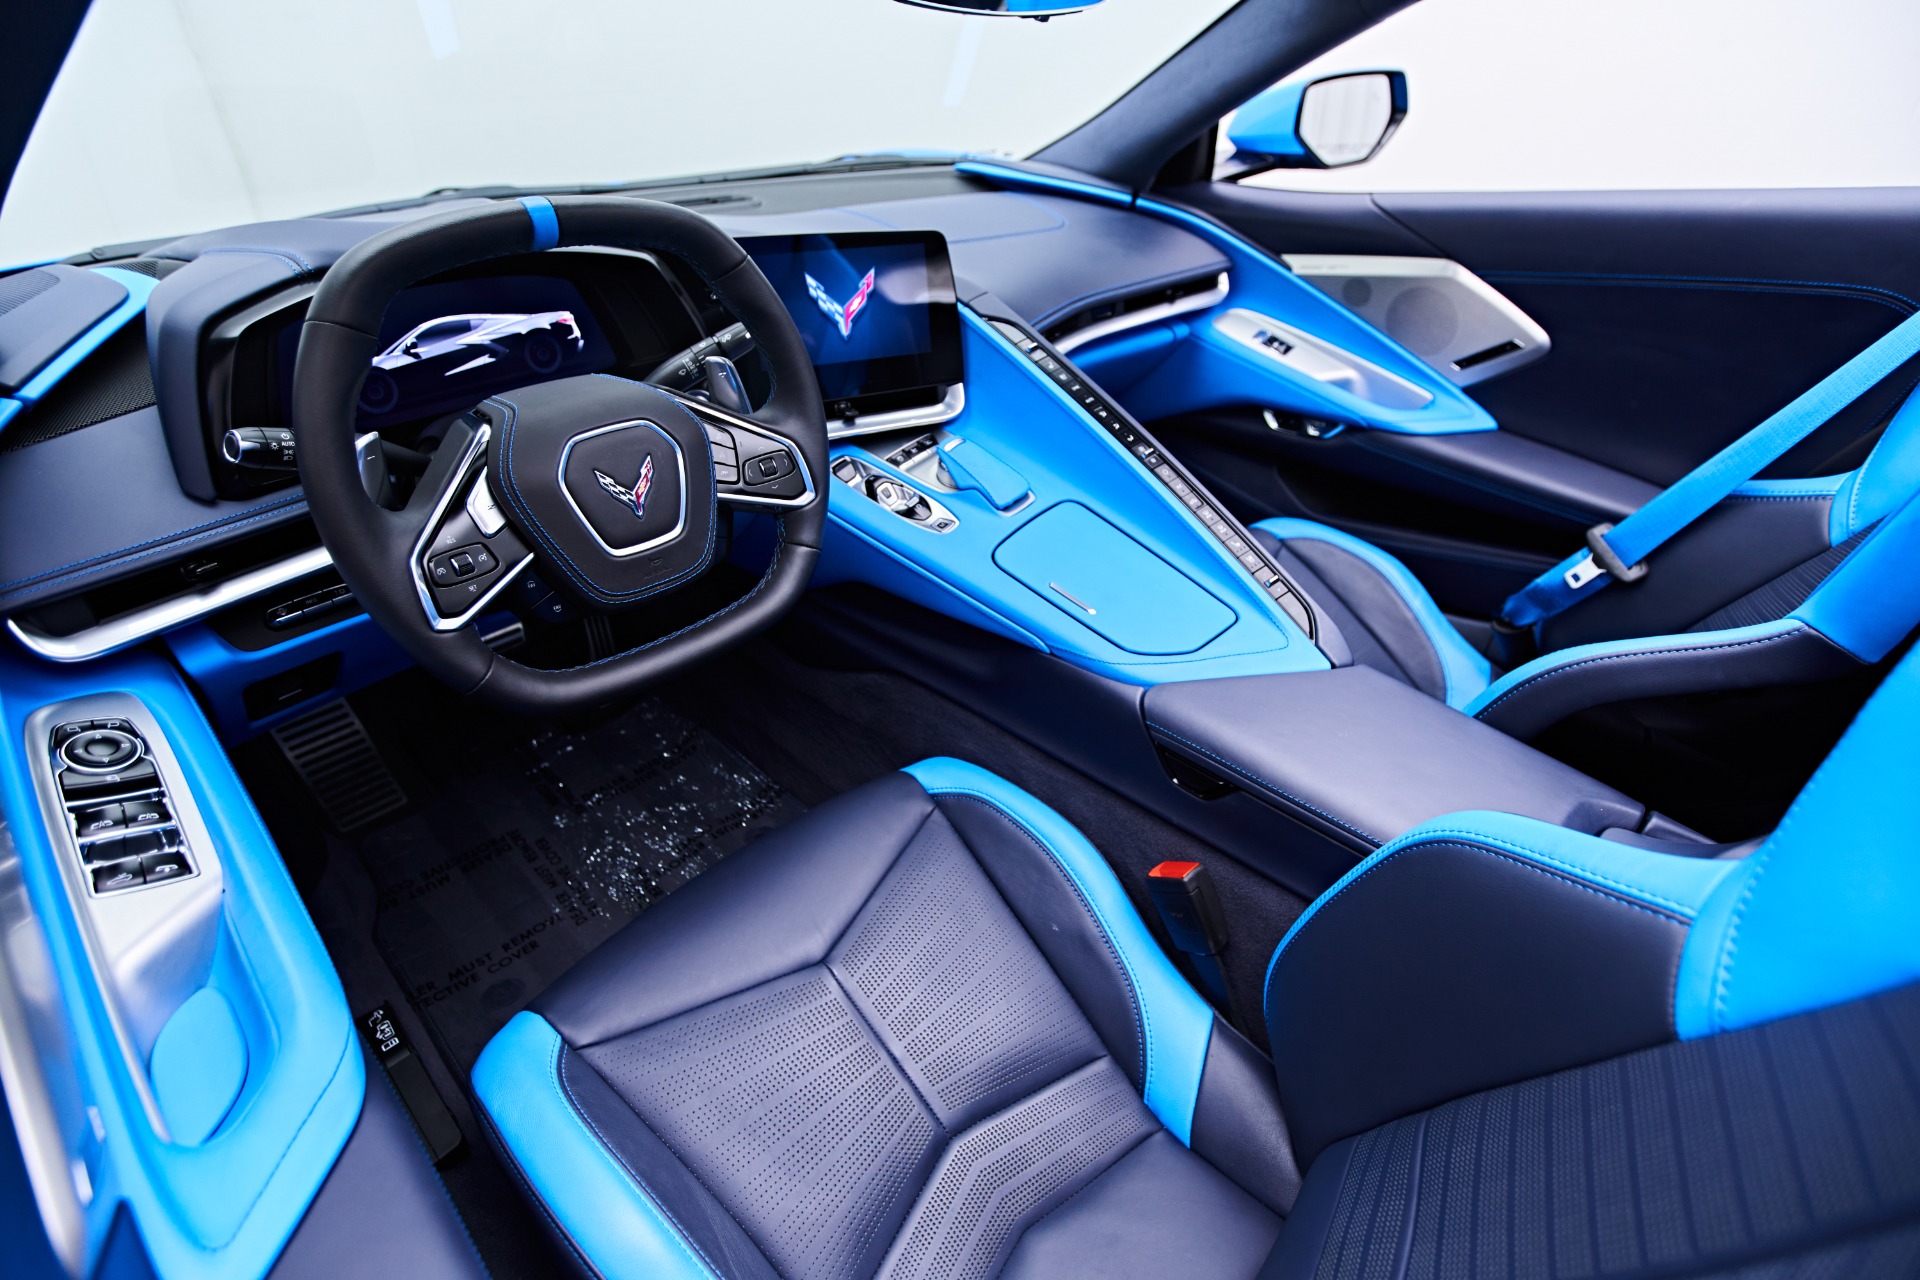 The Real Hero of the New Corvette C8 Is Its Luxe, Cockpit Interior